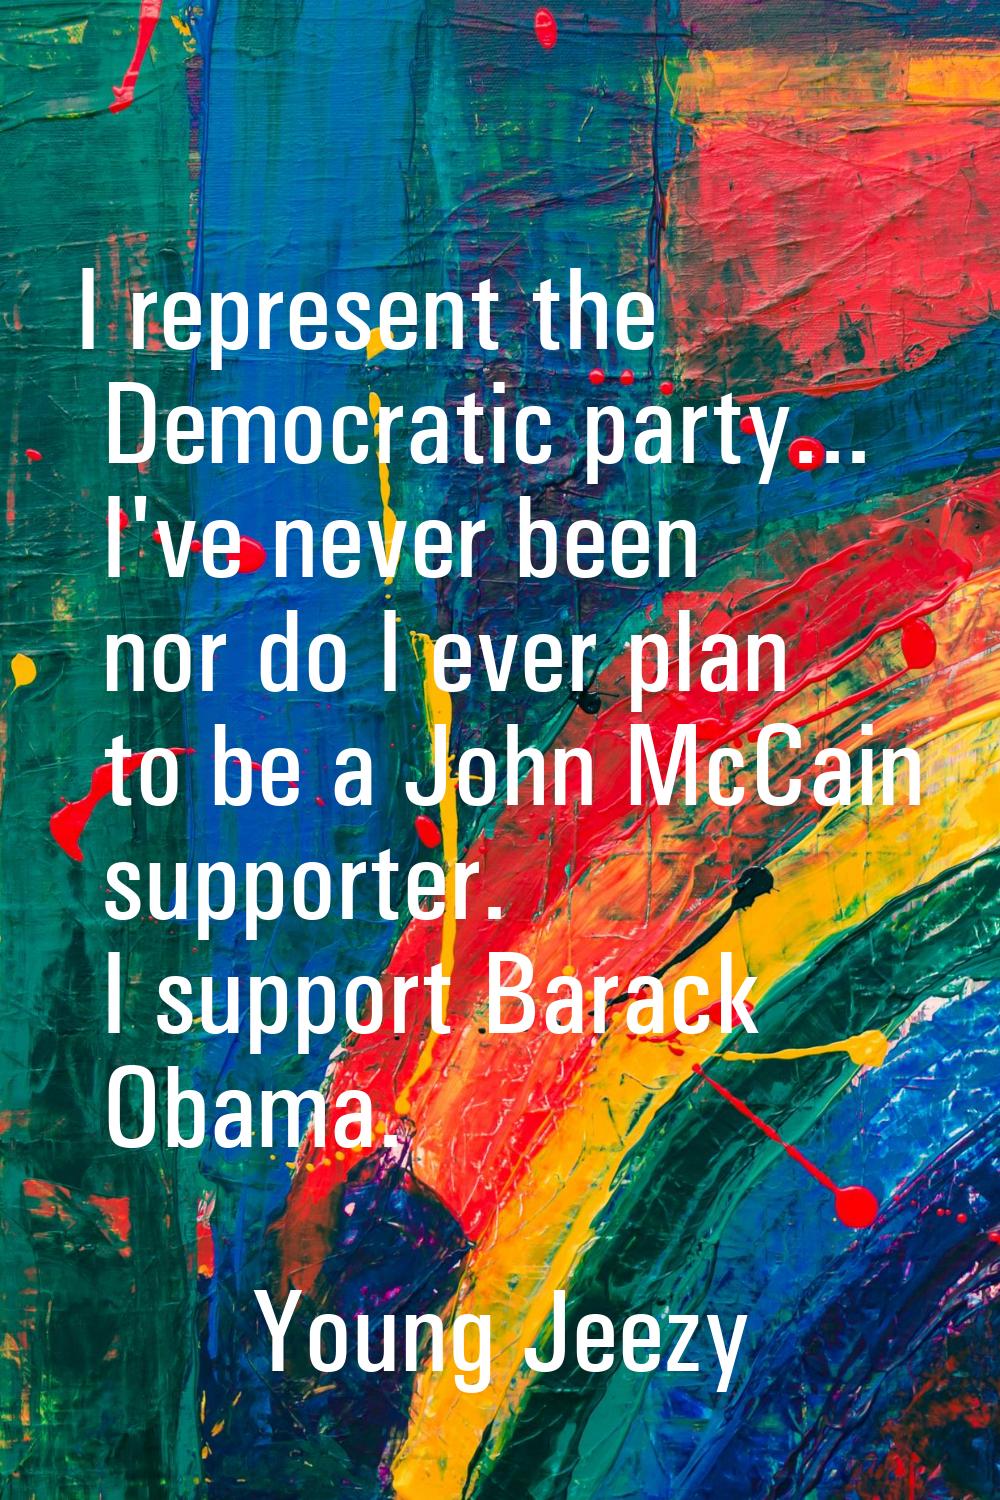 I represent the Democratic party... I've never been nor do I ever plan to be a John McCain supporte